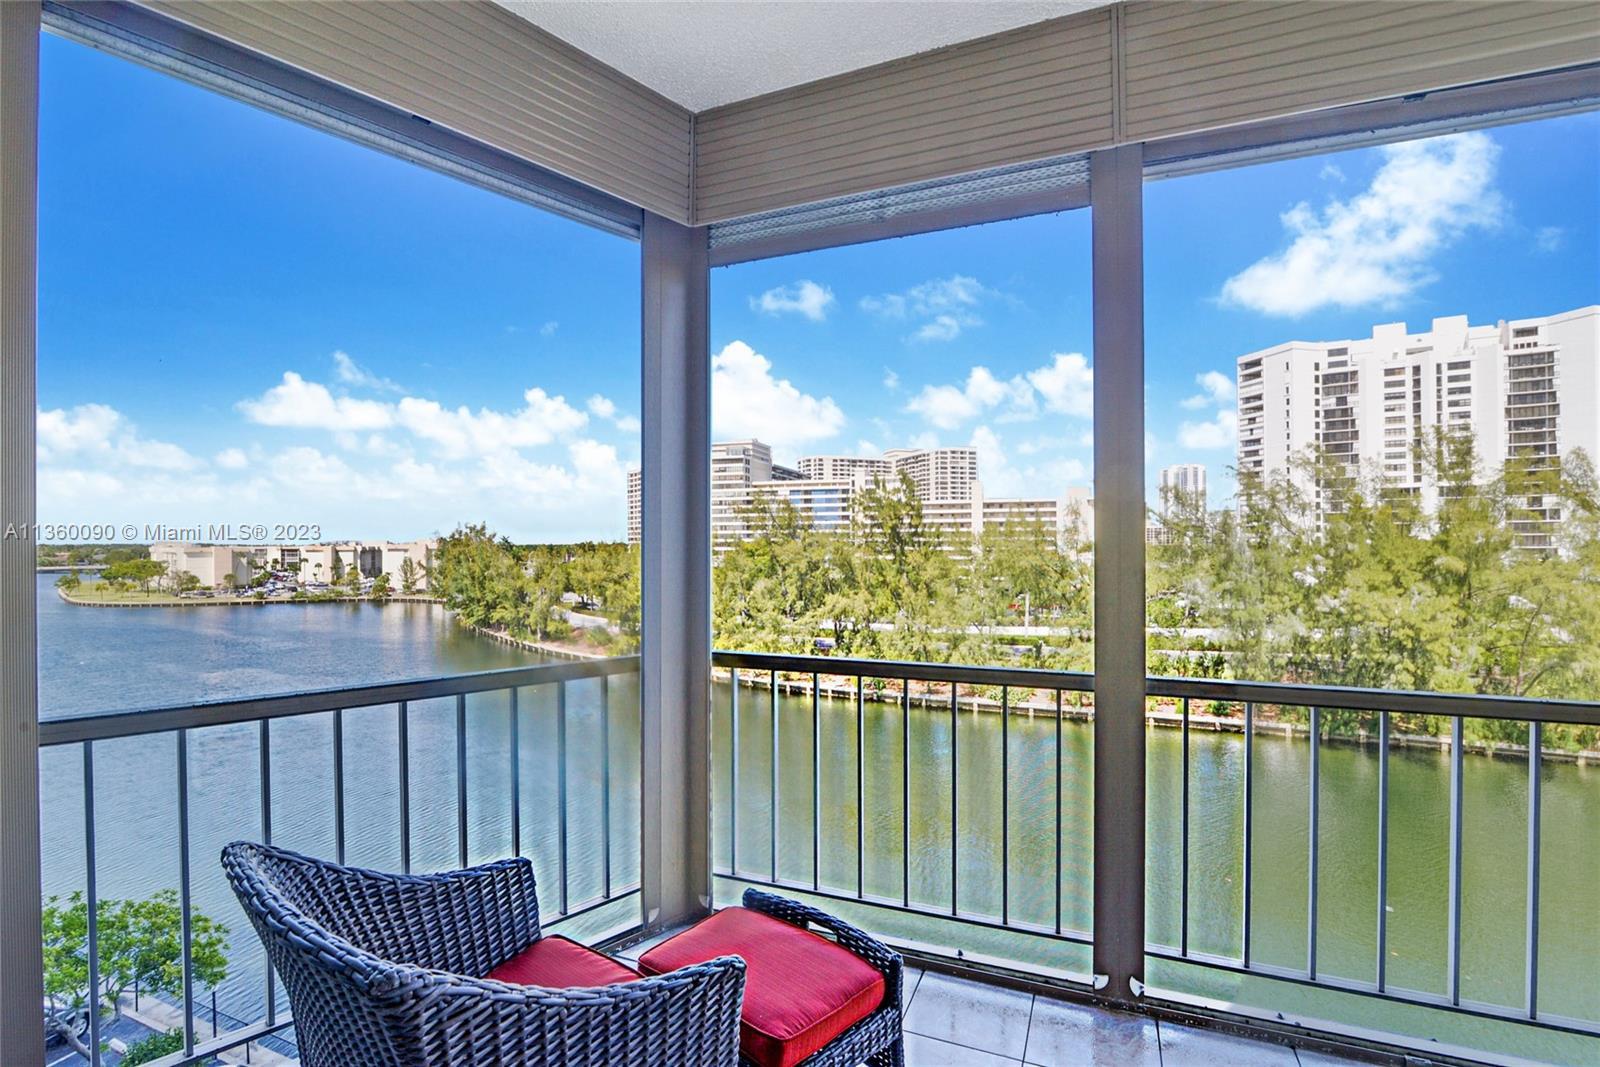 WATERFRONT LIVING IN A BOUTIQUE-STYLE BUILDING AWAITS YOU IN THE HEART OF HALLANDALE! SPACIOUS, PRIS